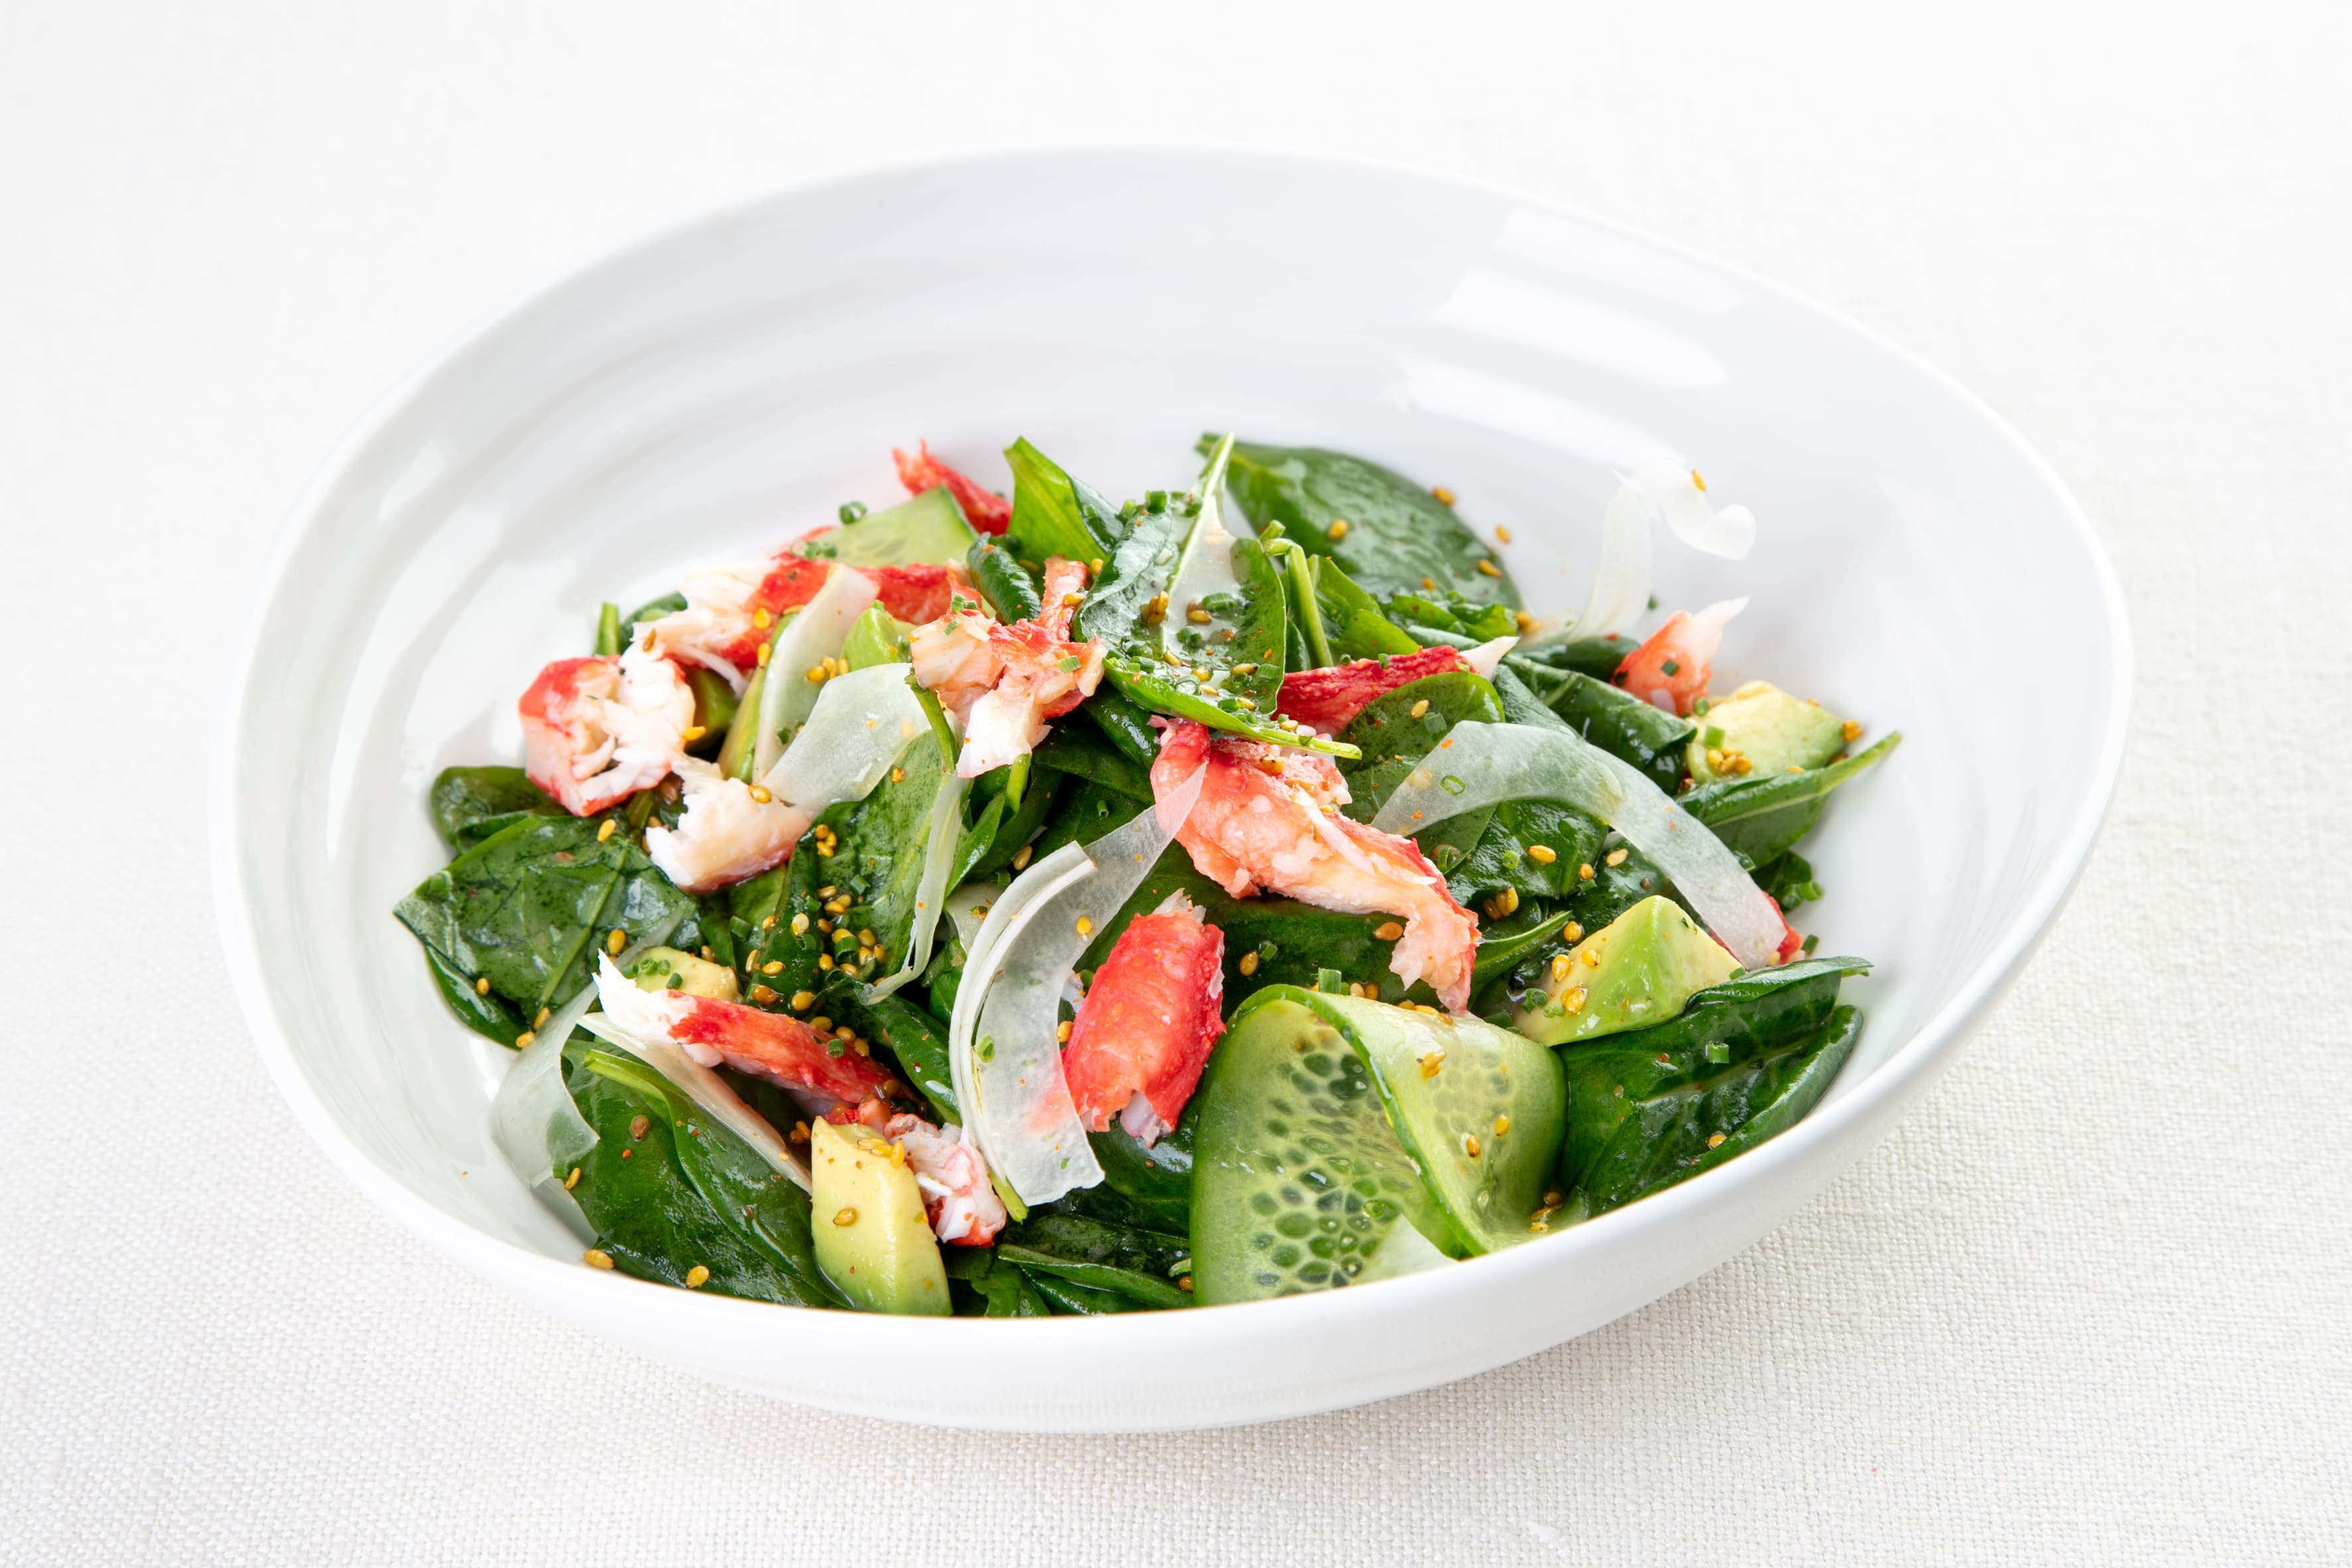 Salad with crab, avocado, fennel and Asian dressing